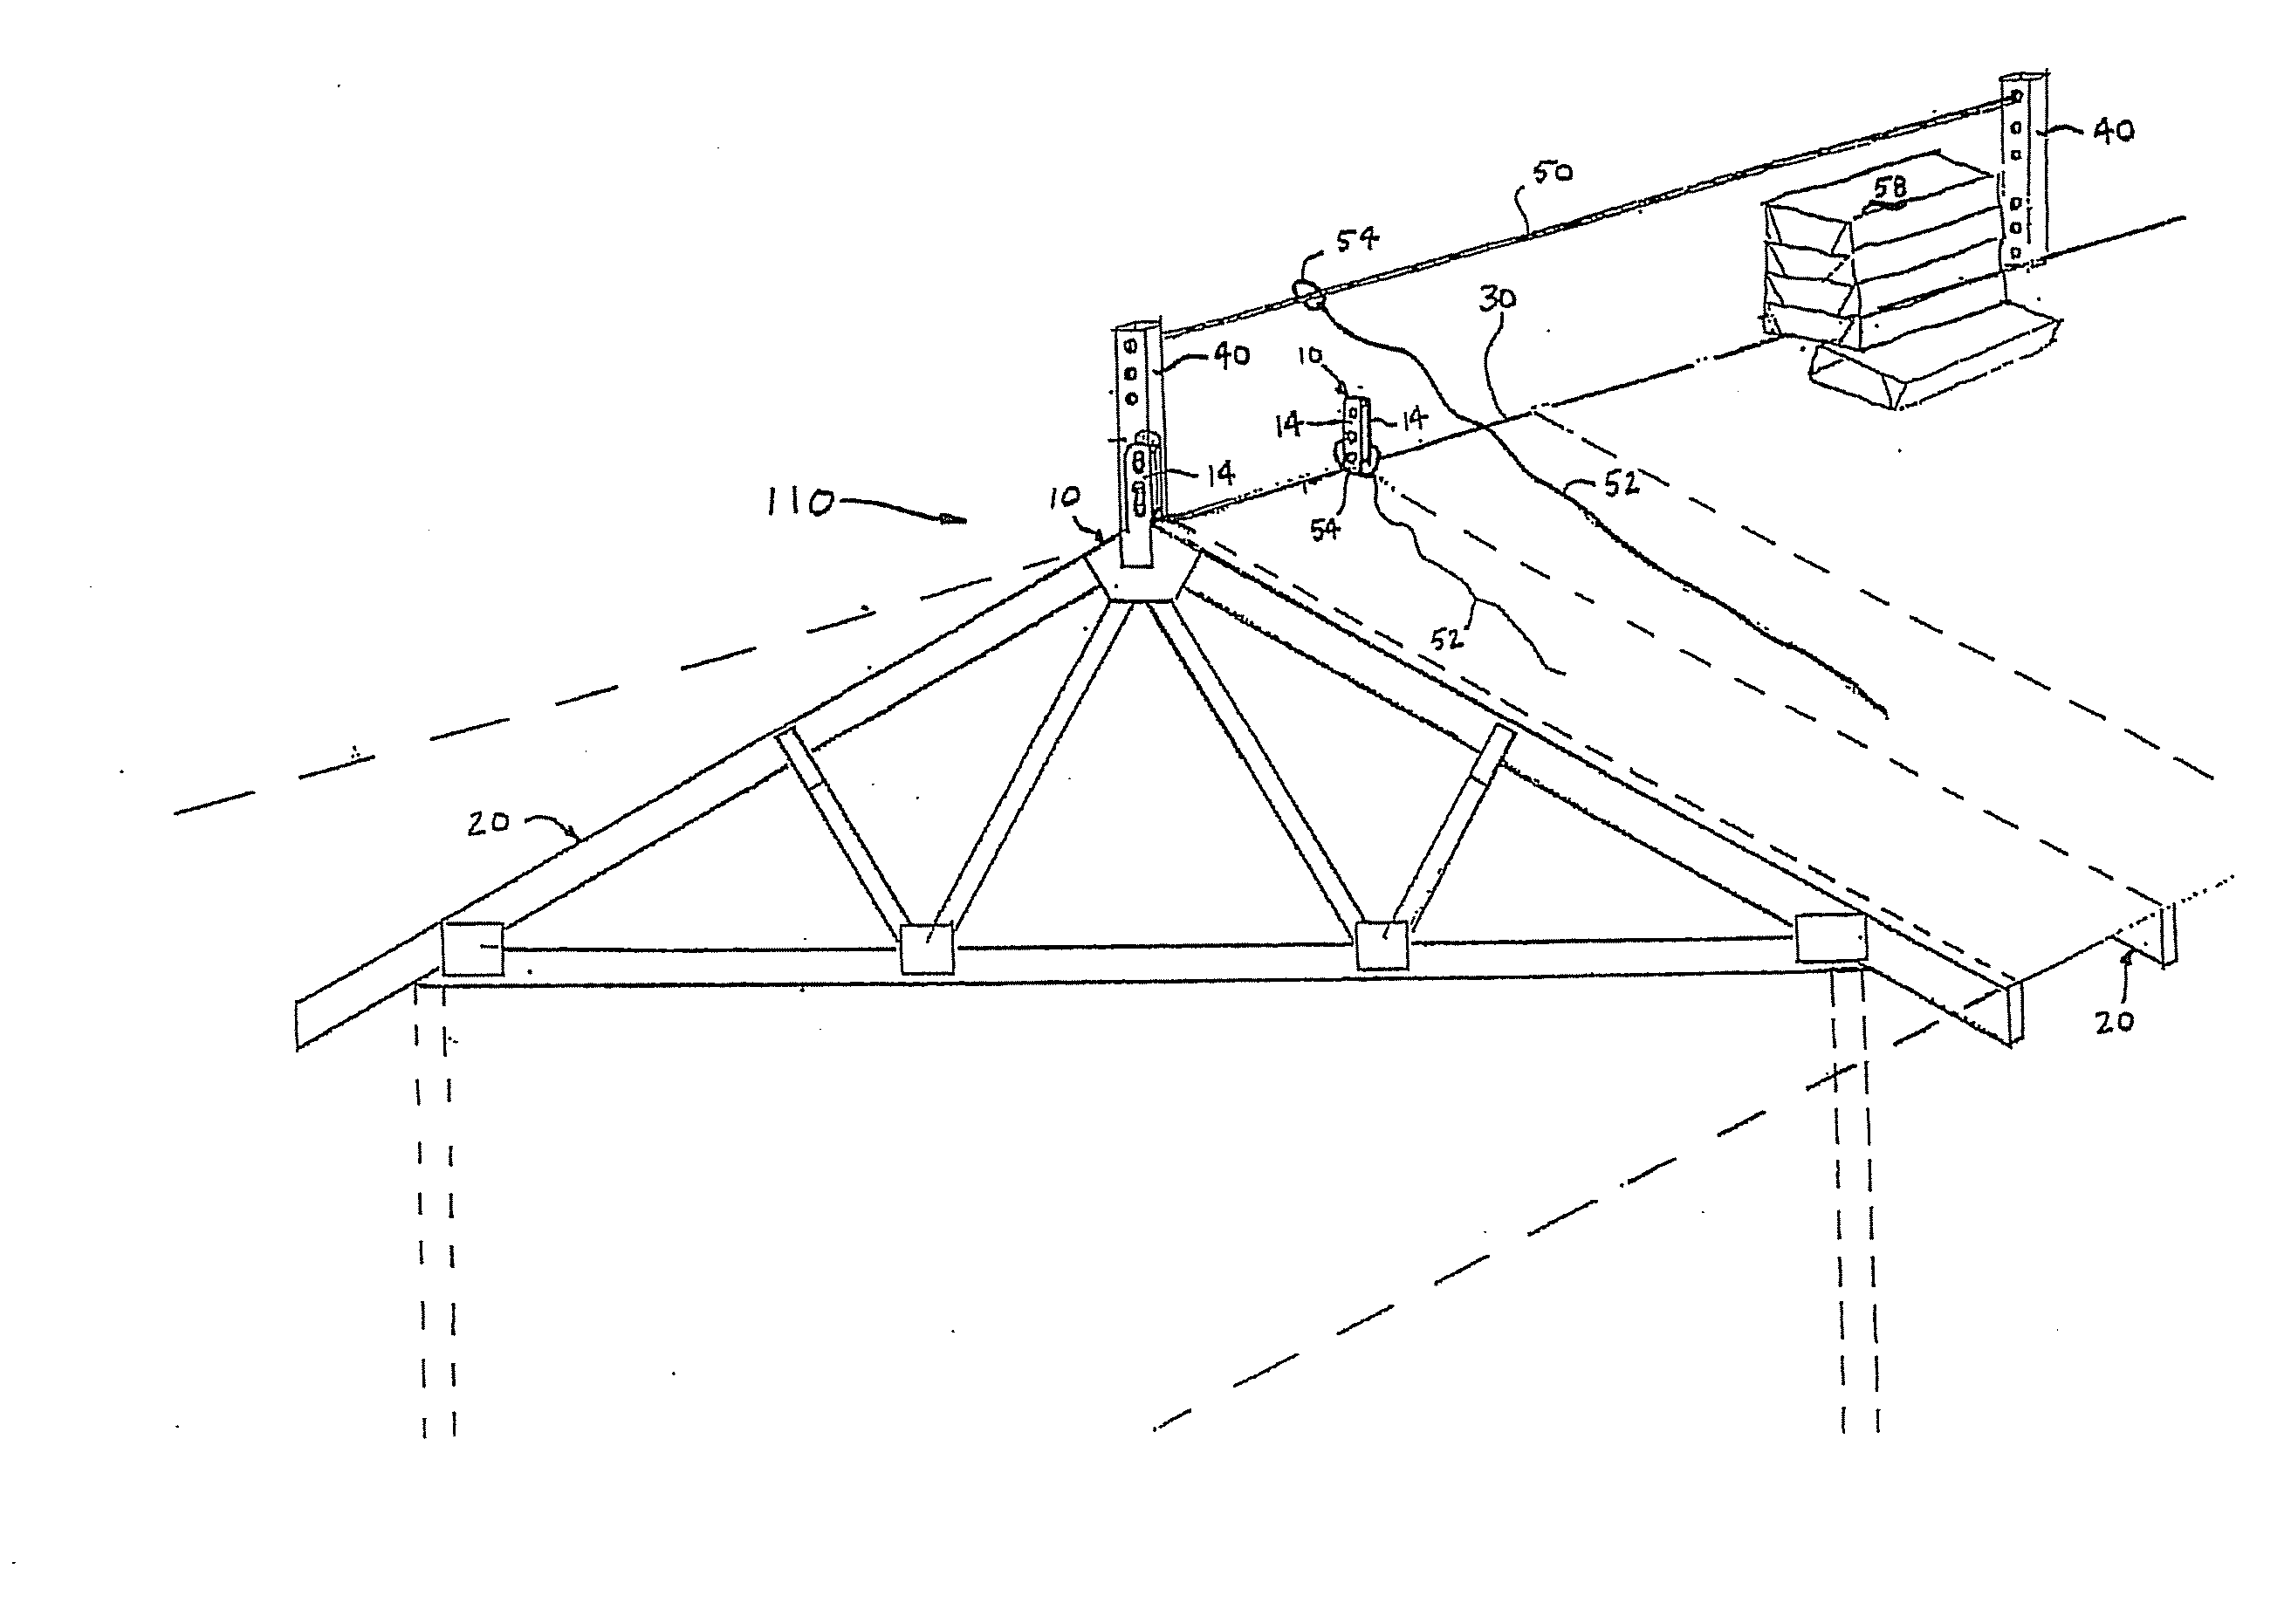 Truss gusset plate and anchor safety system